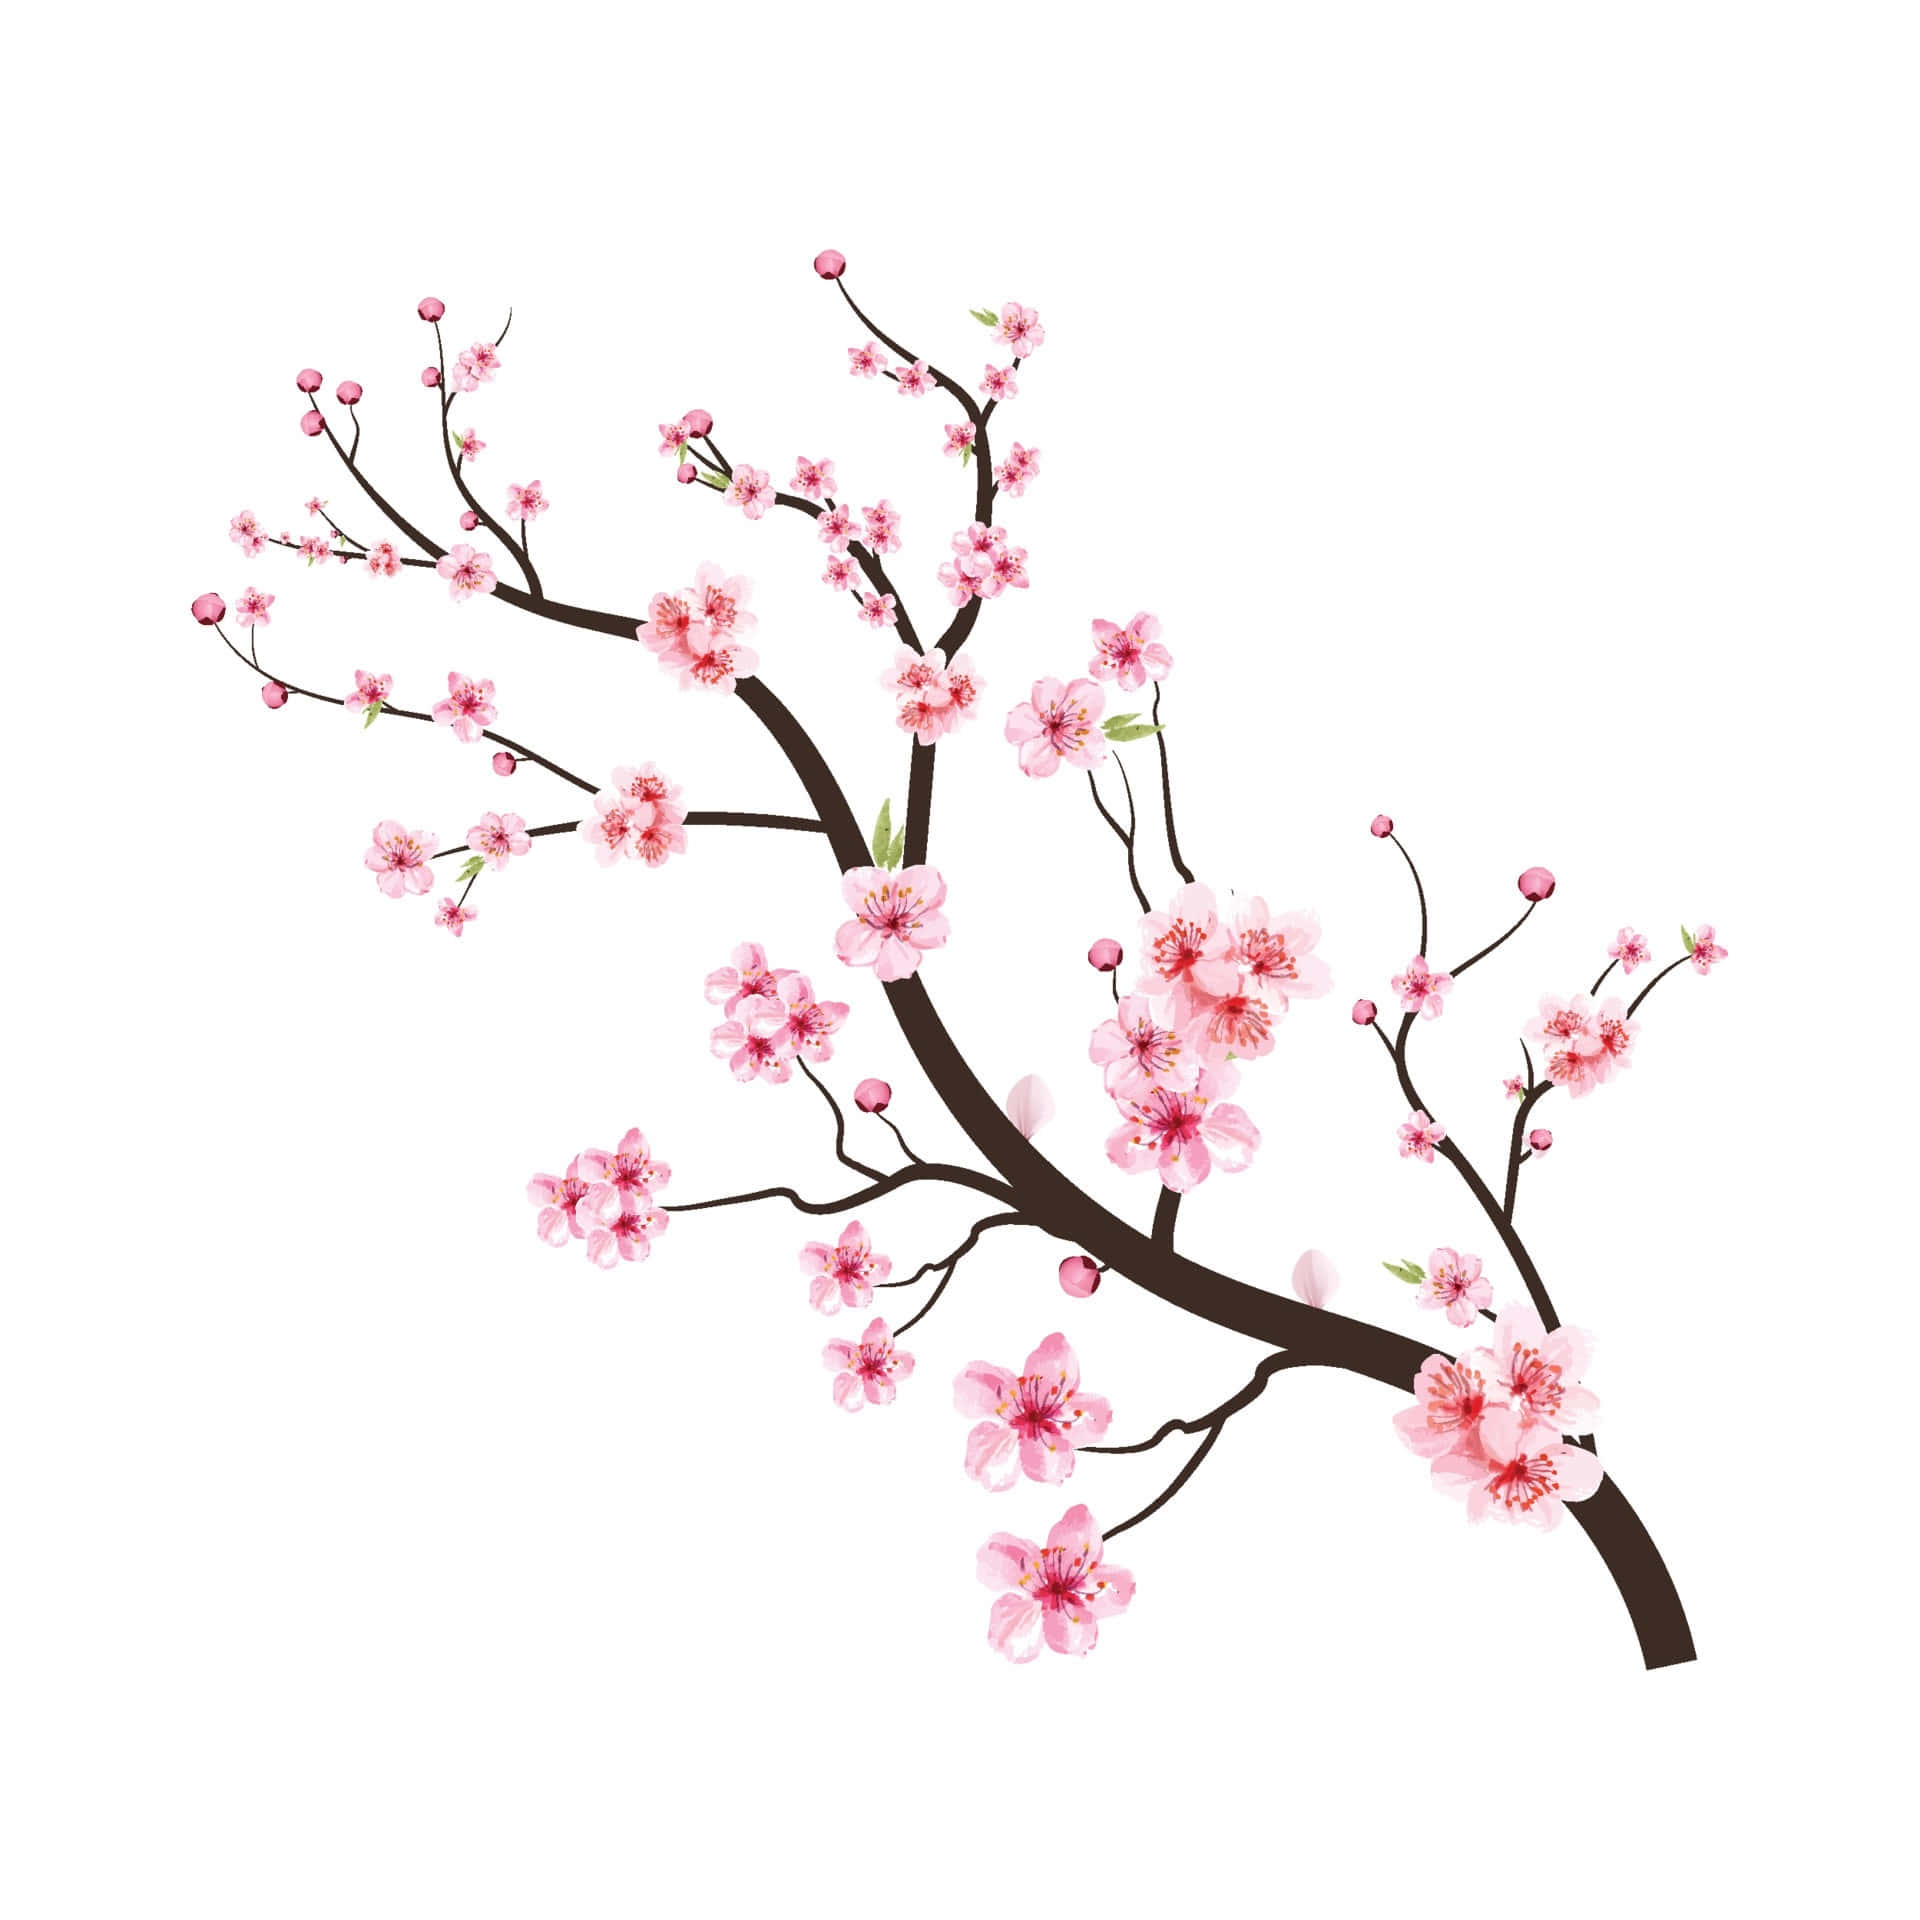 A Branch Of Cherry Blossoms On A White Background